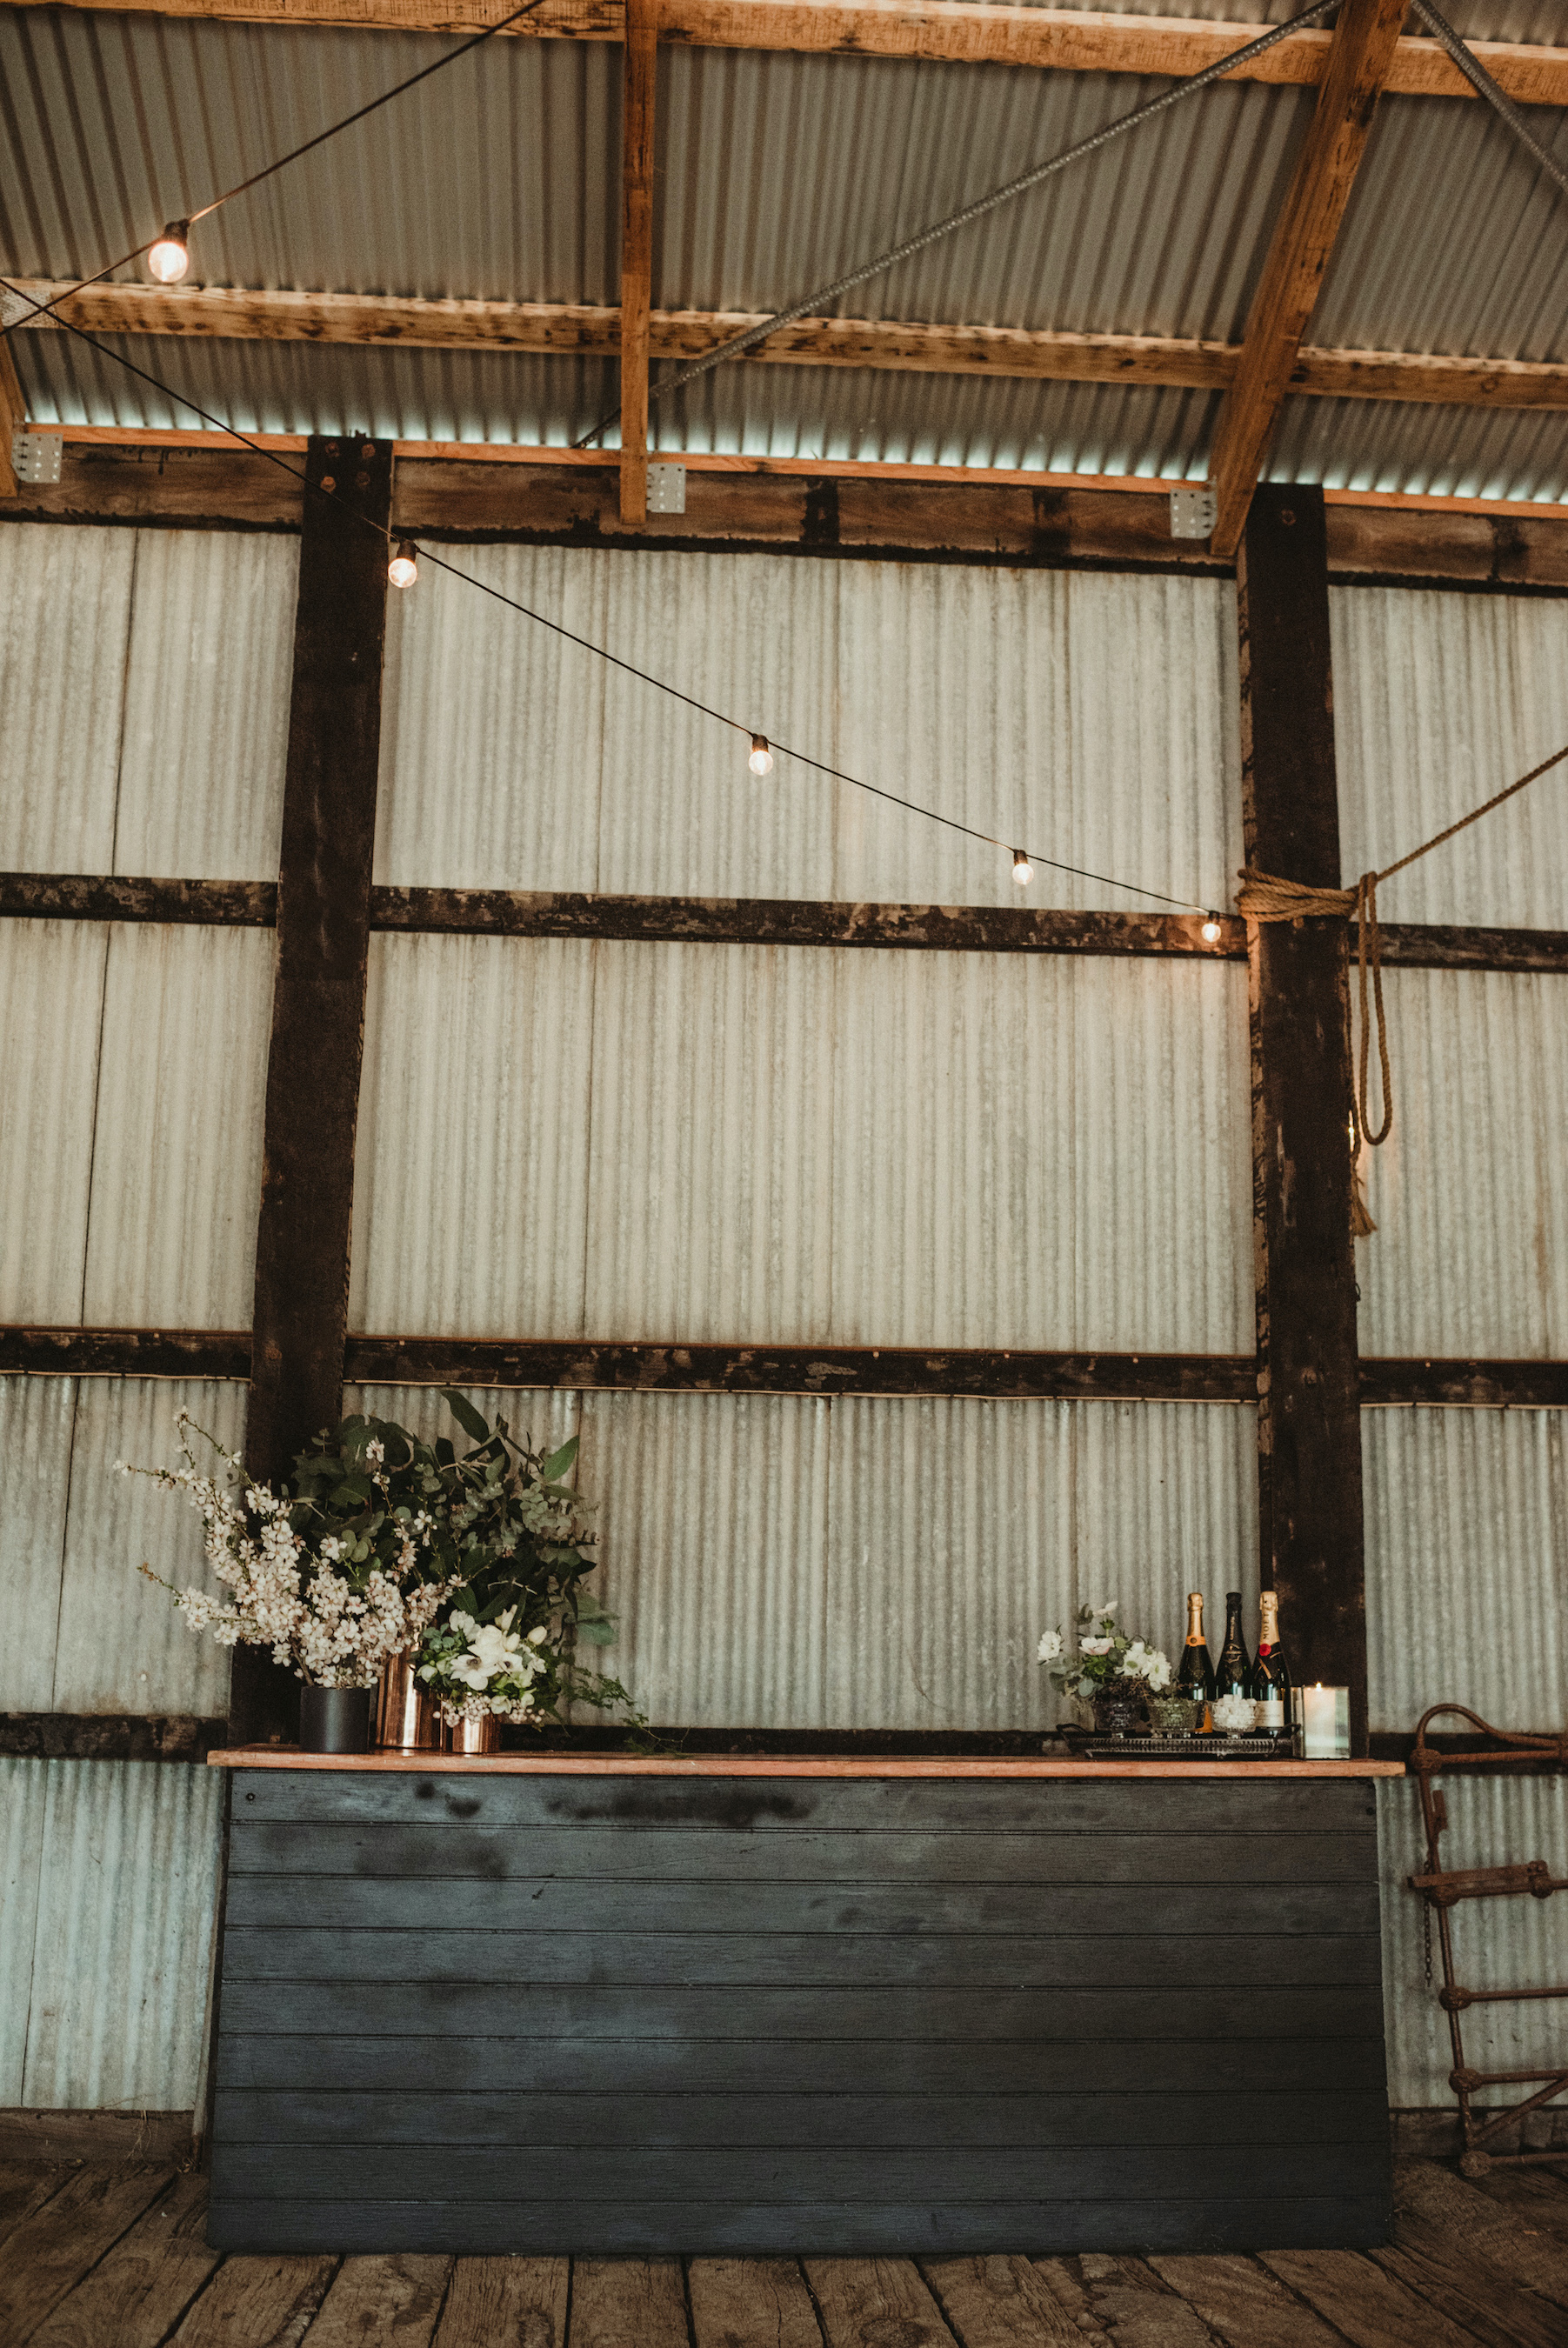 Glen Lea Homestead Styled Shoot, Historic Dry Hire Wedding Venue in the Adelaide Hills. A rustic farm setting now available for ceremonies and receptions.